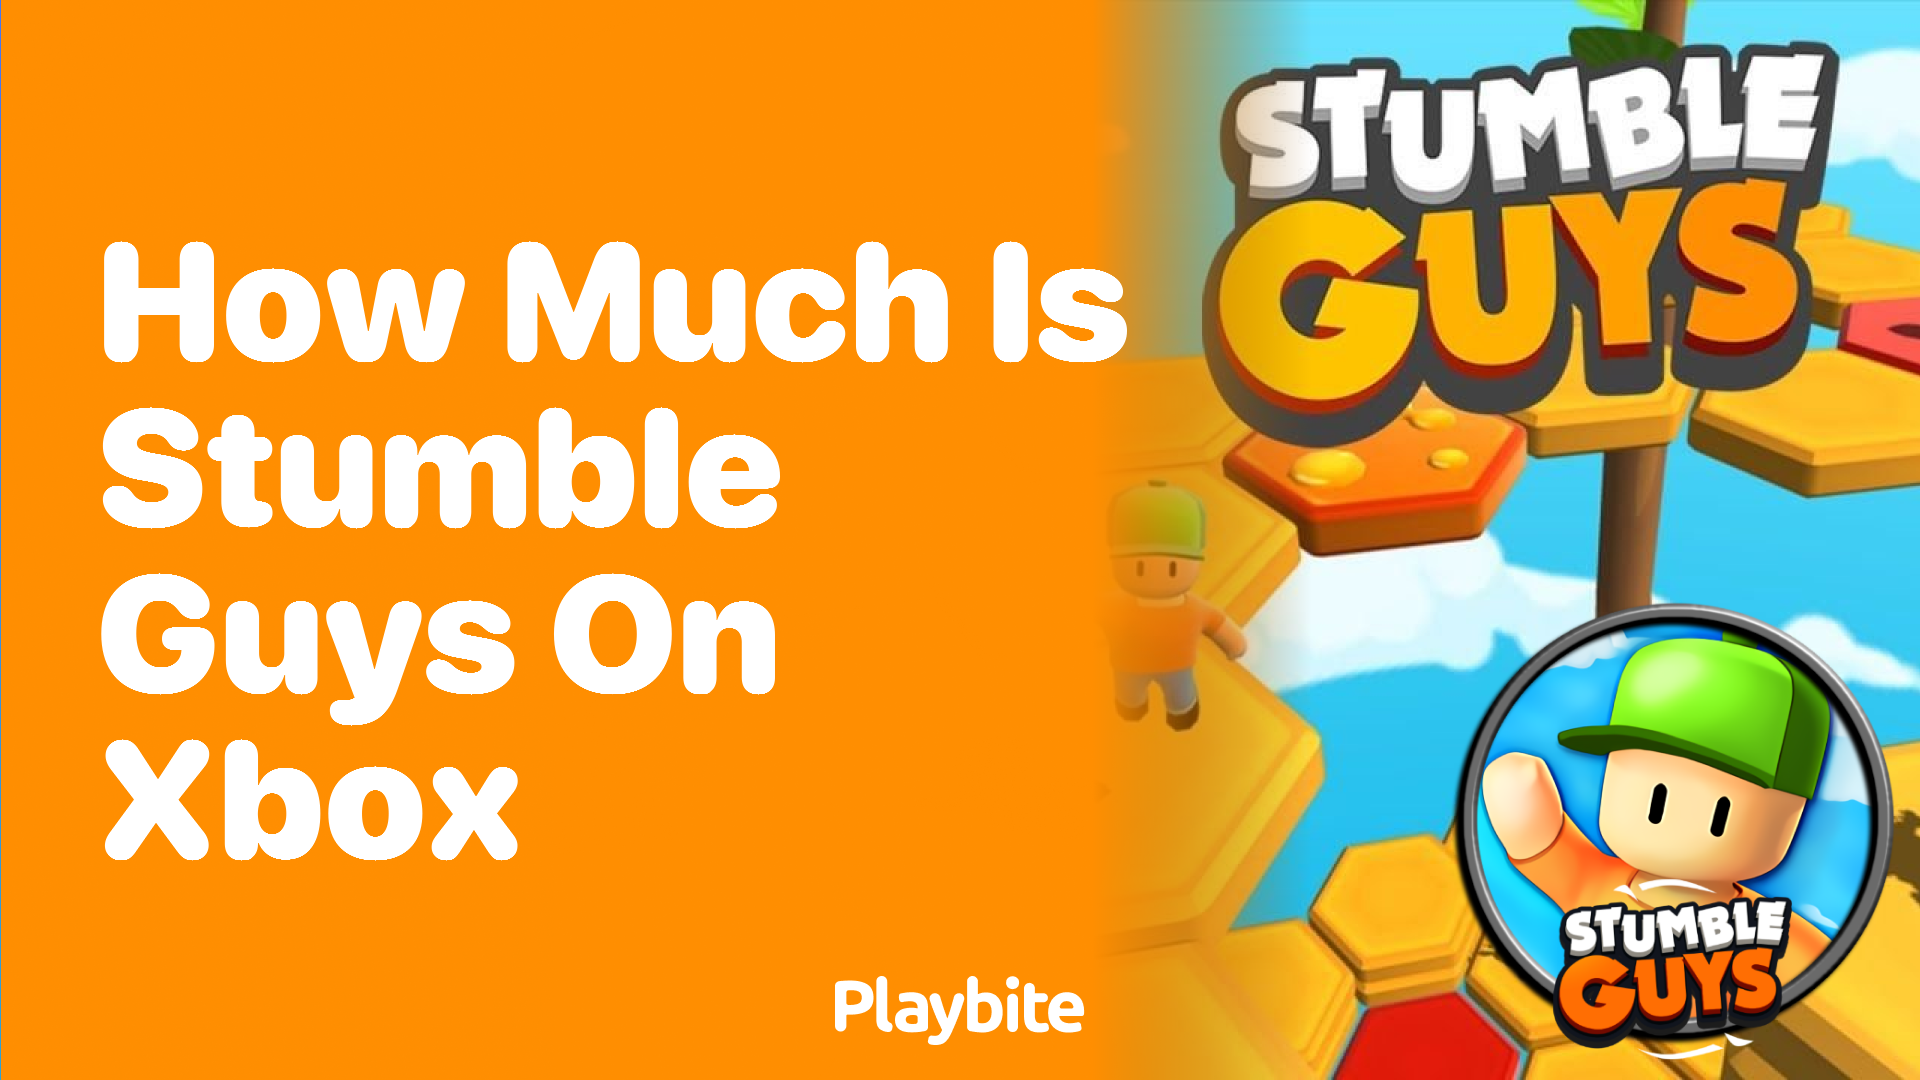 How Much Does Stumble Guys Cost on Xbox?